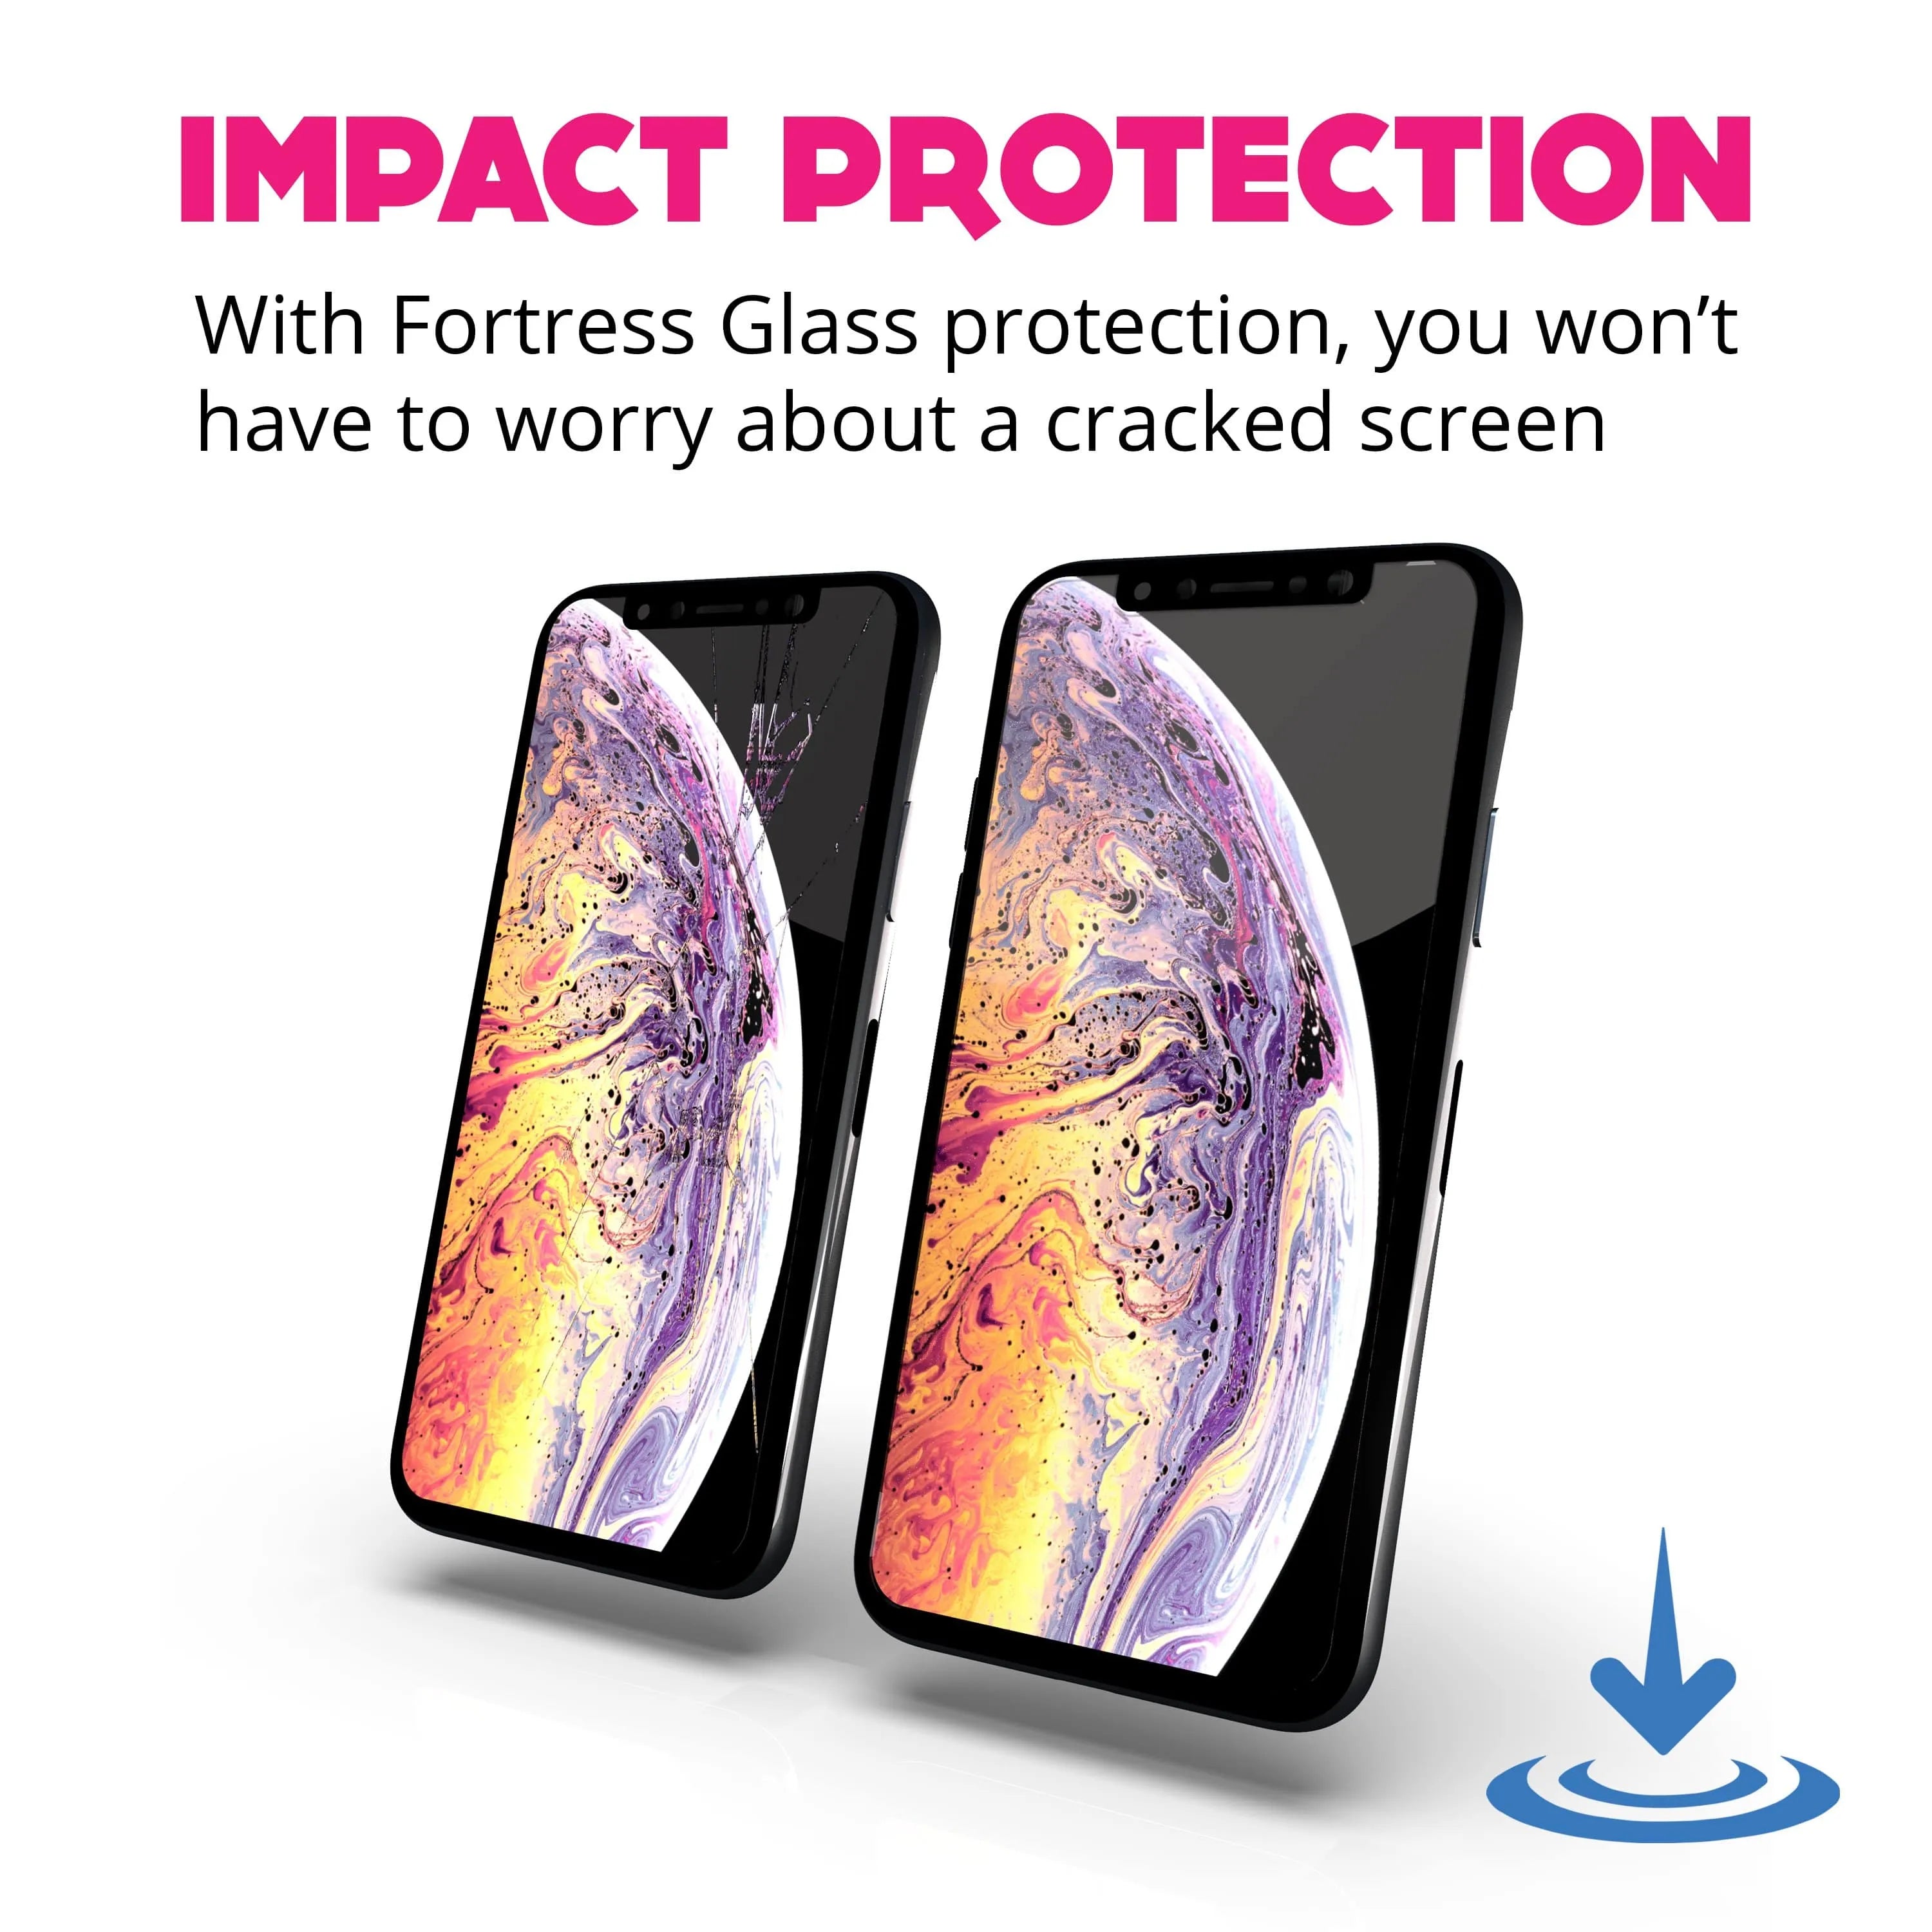 Fortress iPhone 12 Mini Screen Protector - $200 Device Coverage  Scooch Screen Protector